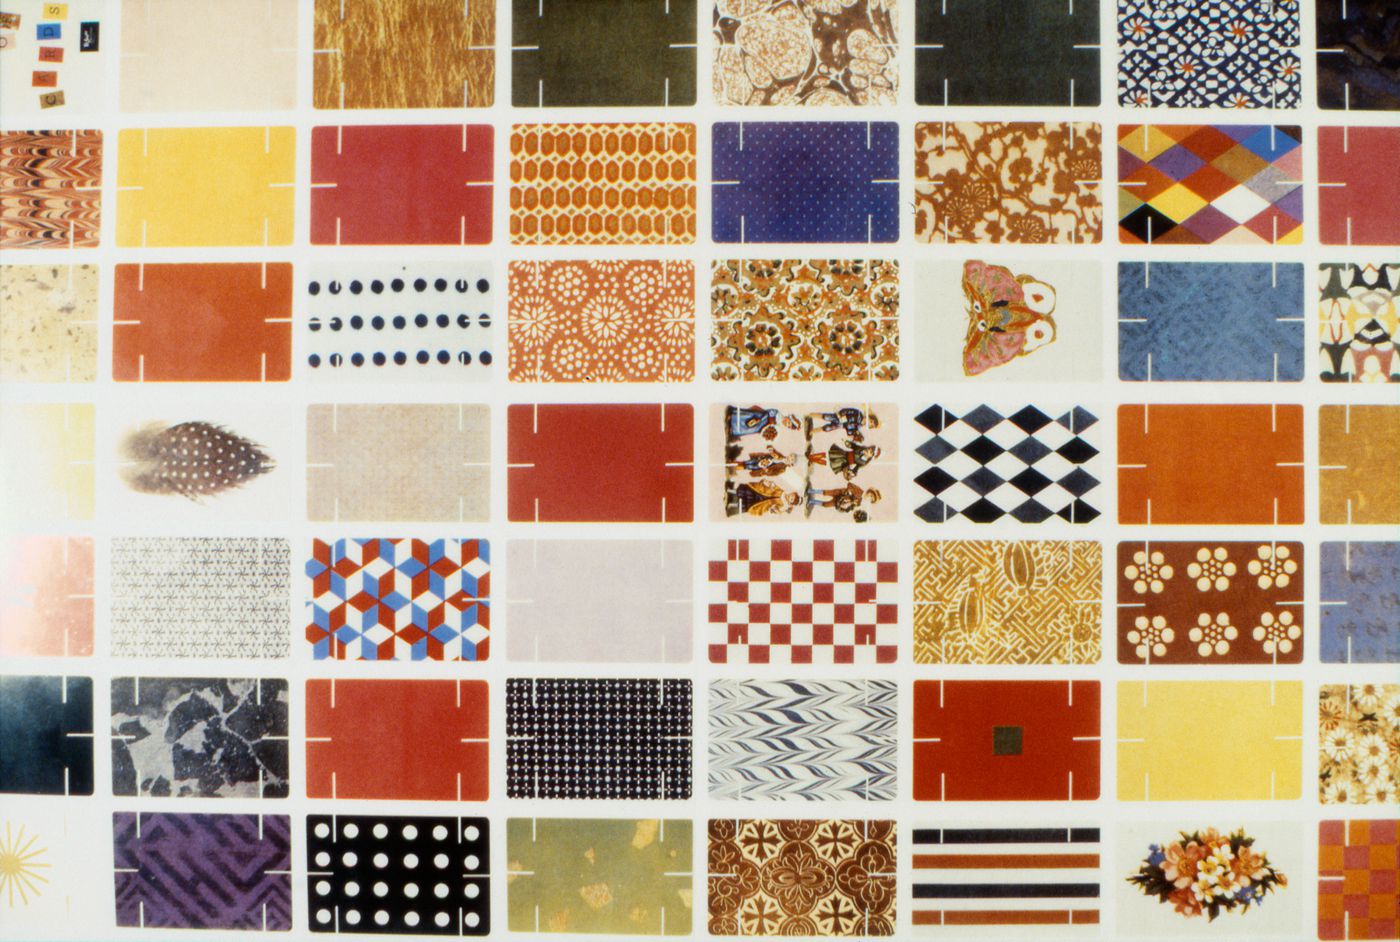 Slide with patterns, by Charles and Ray Eames